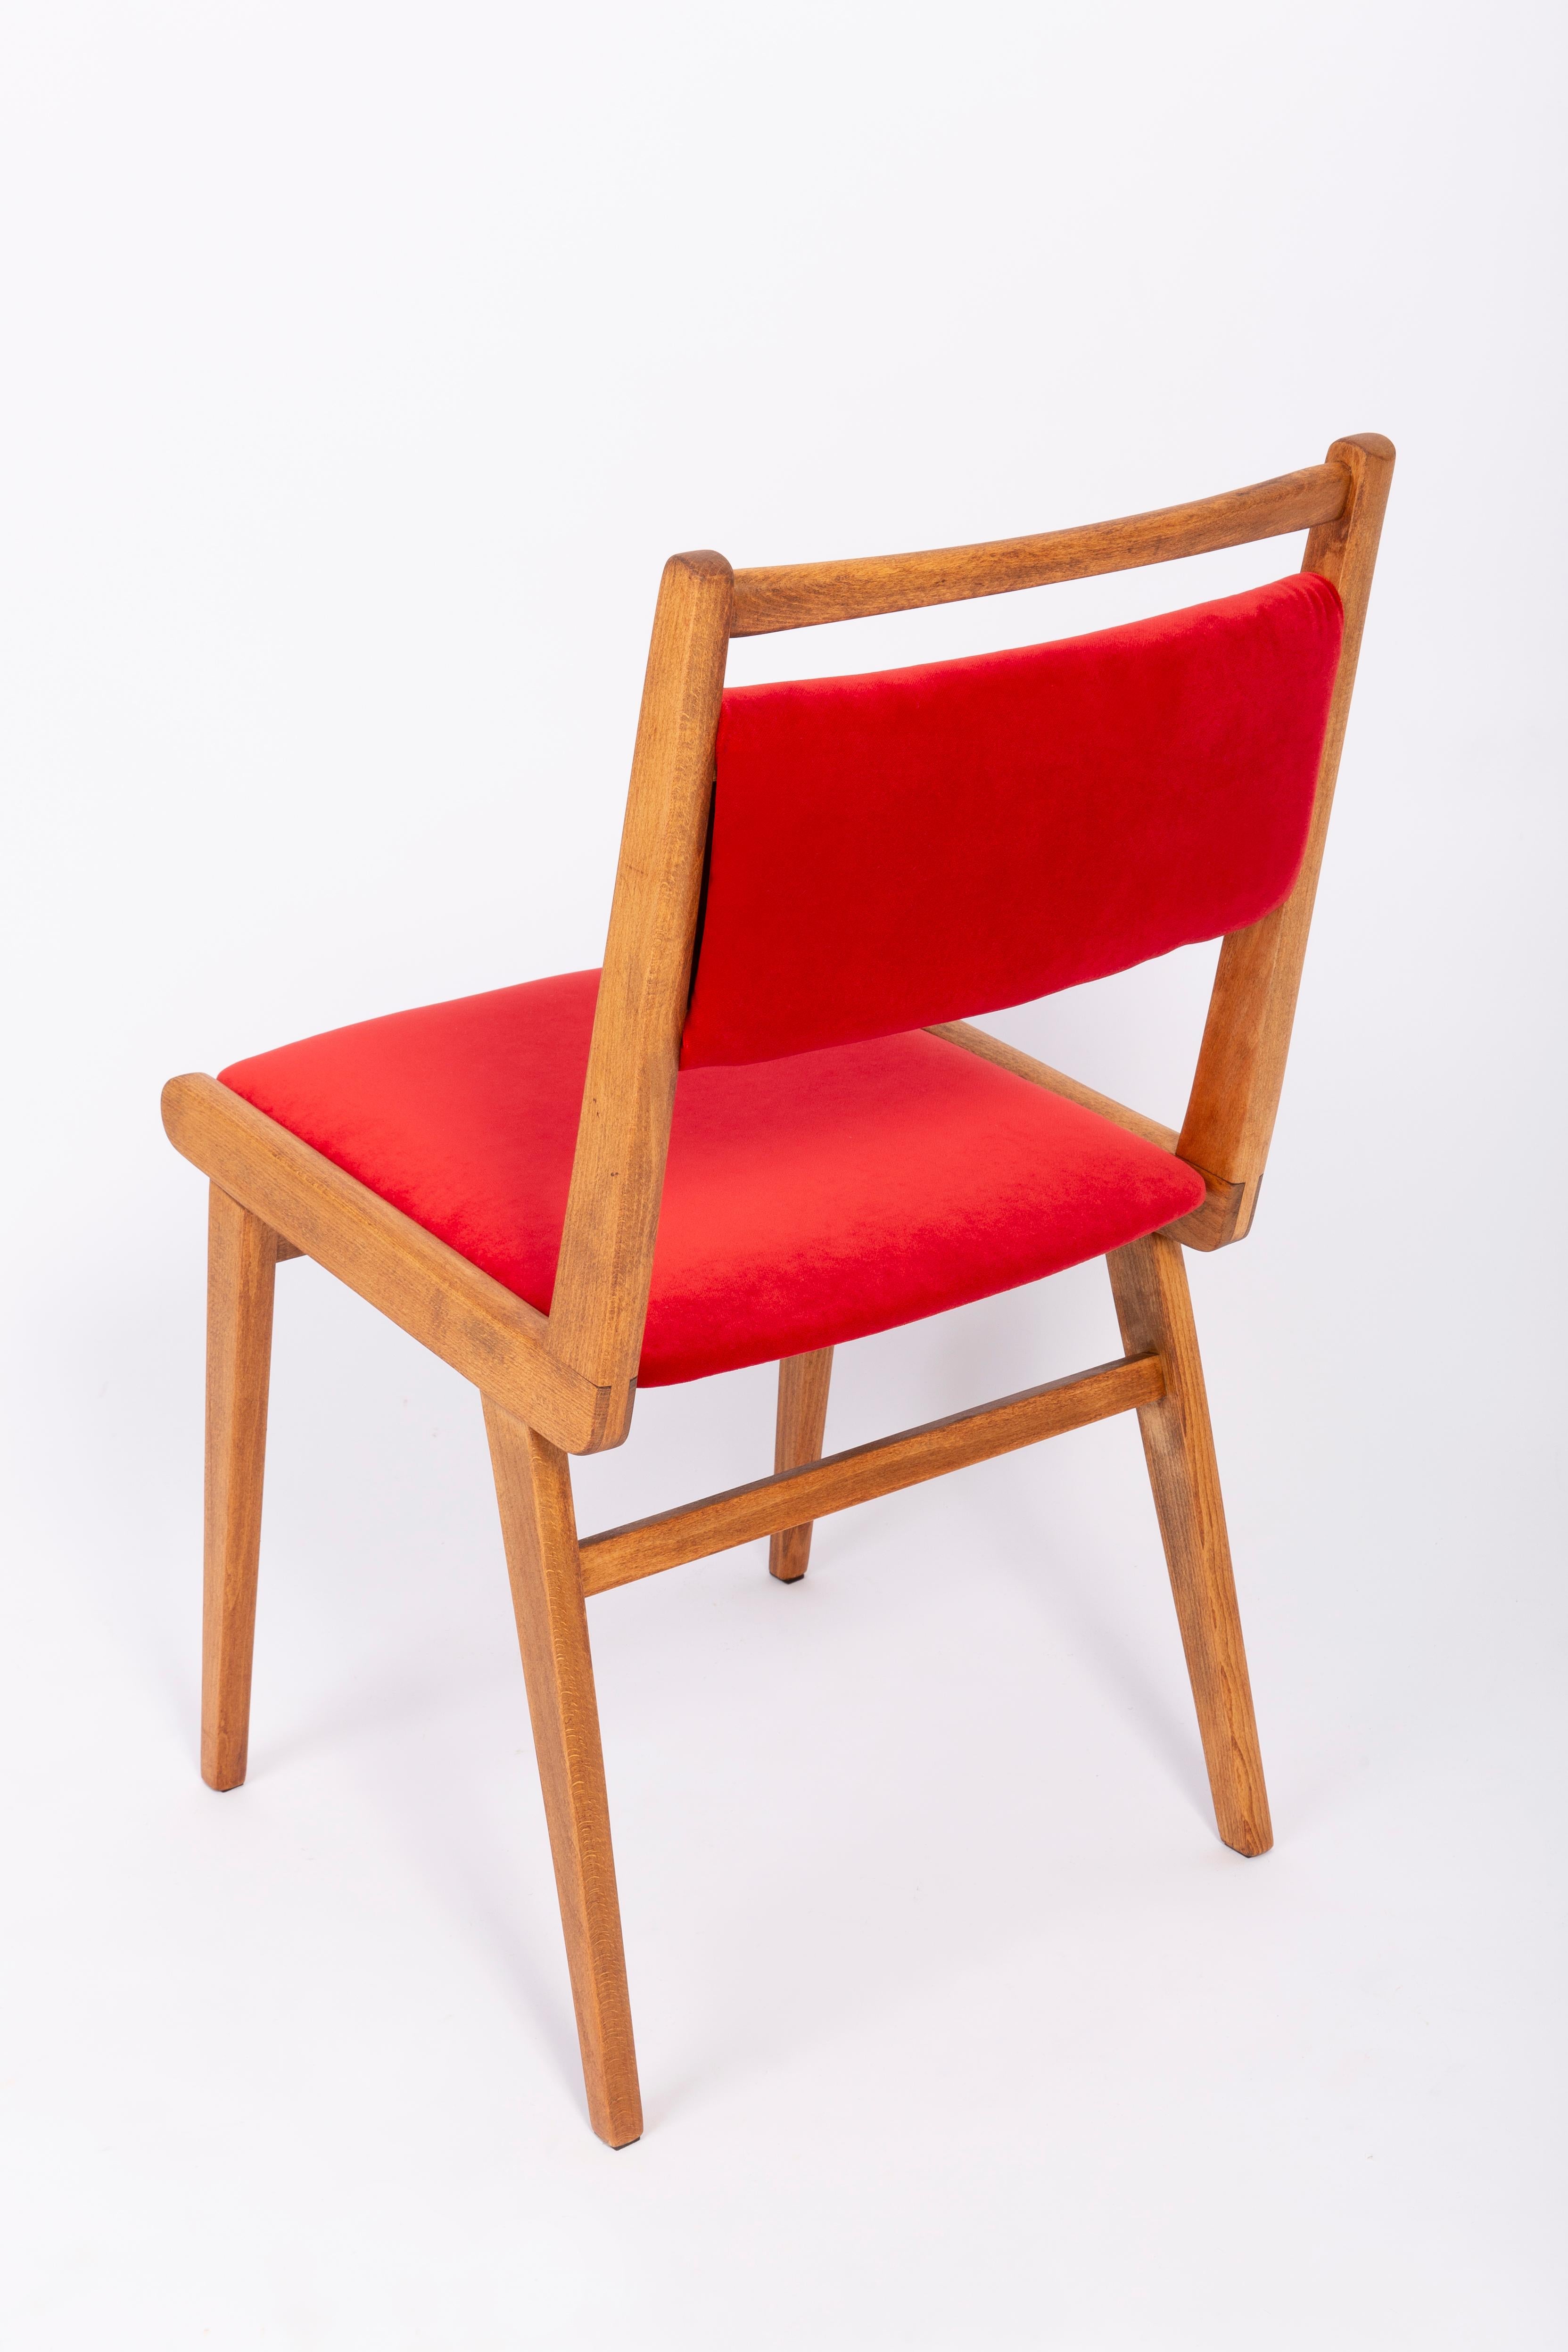 Set of Two 20th Century White and Red Velvet Chairs, Poland, 1960s For Sale 10